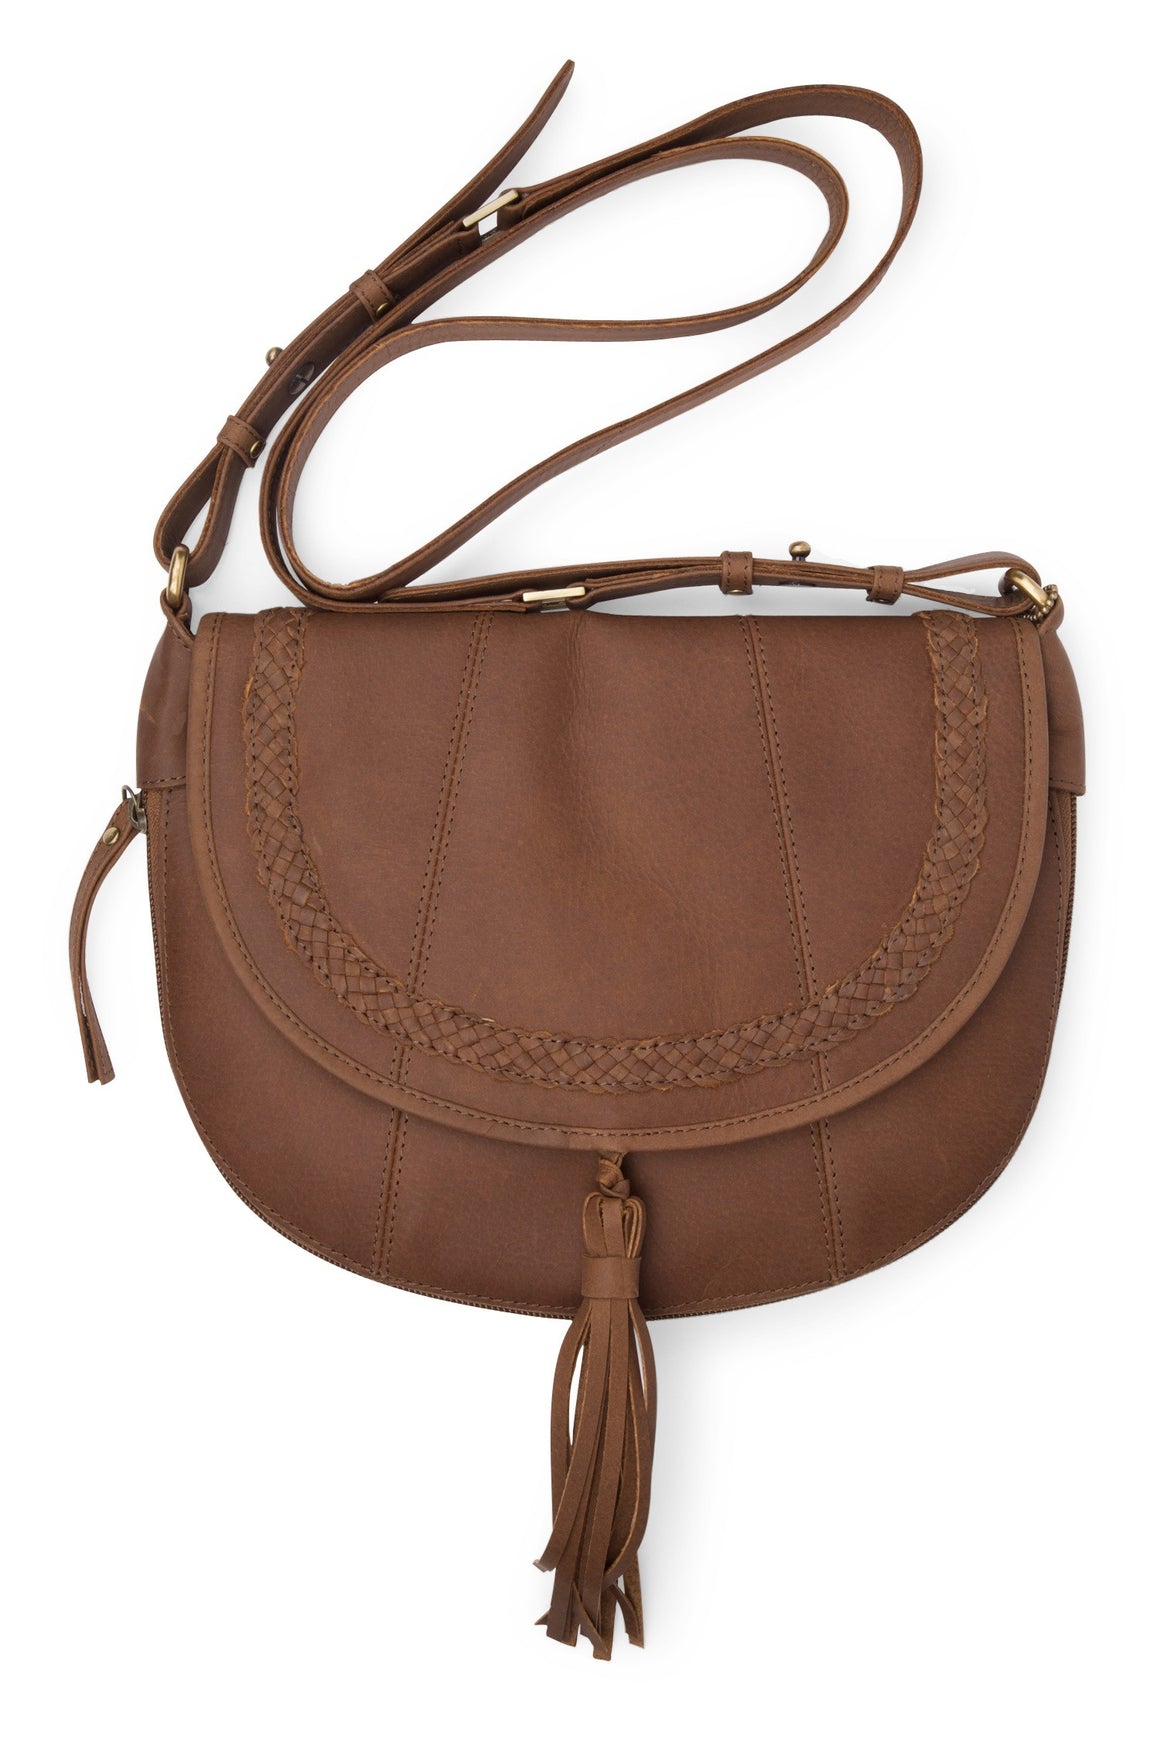 Eco-Leather Saddle Purse Handcrafted in India